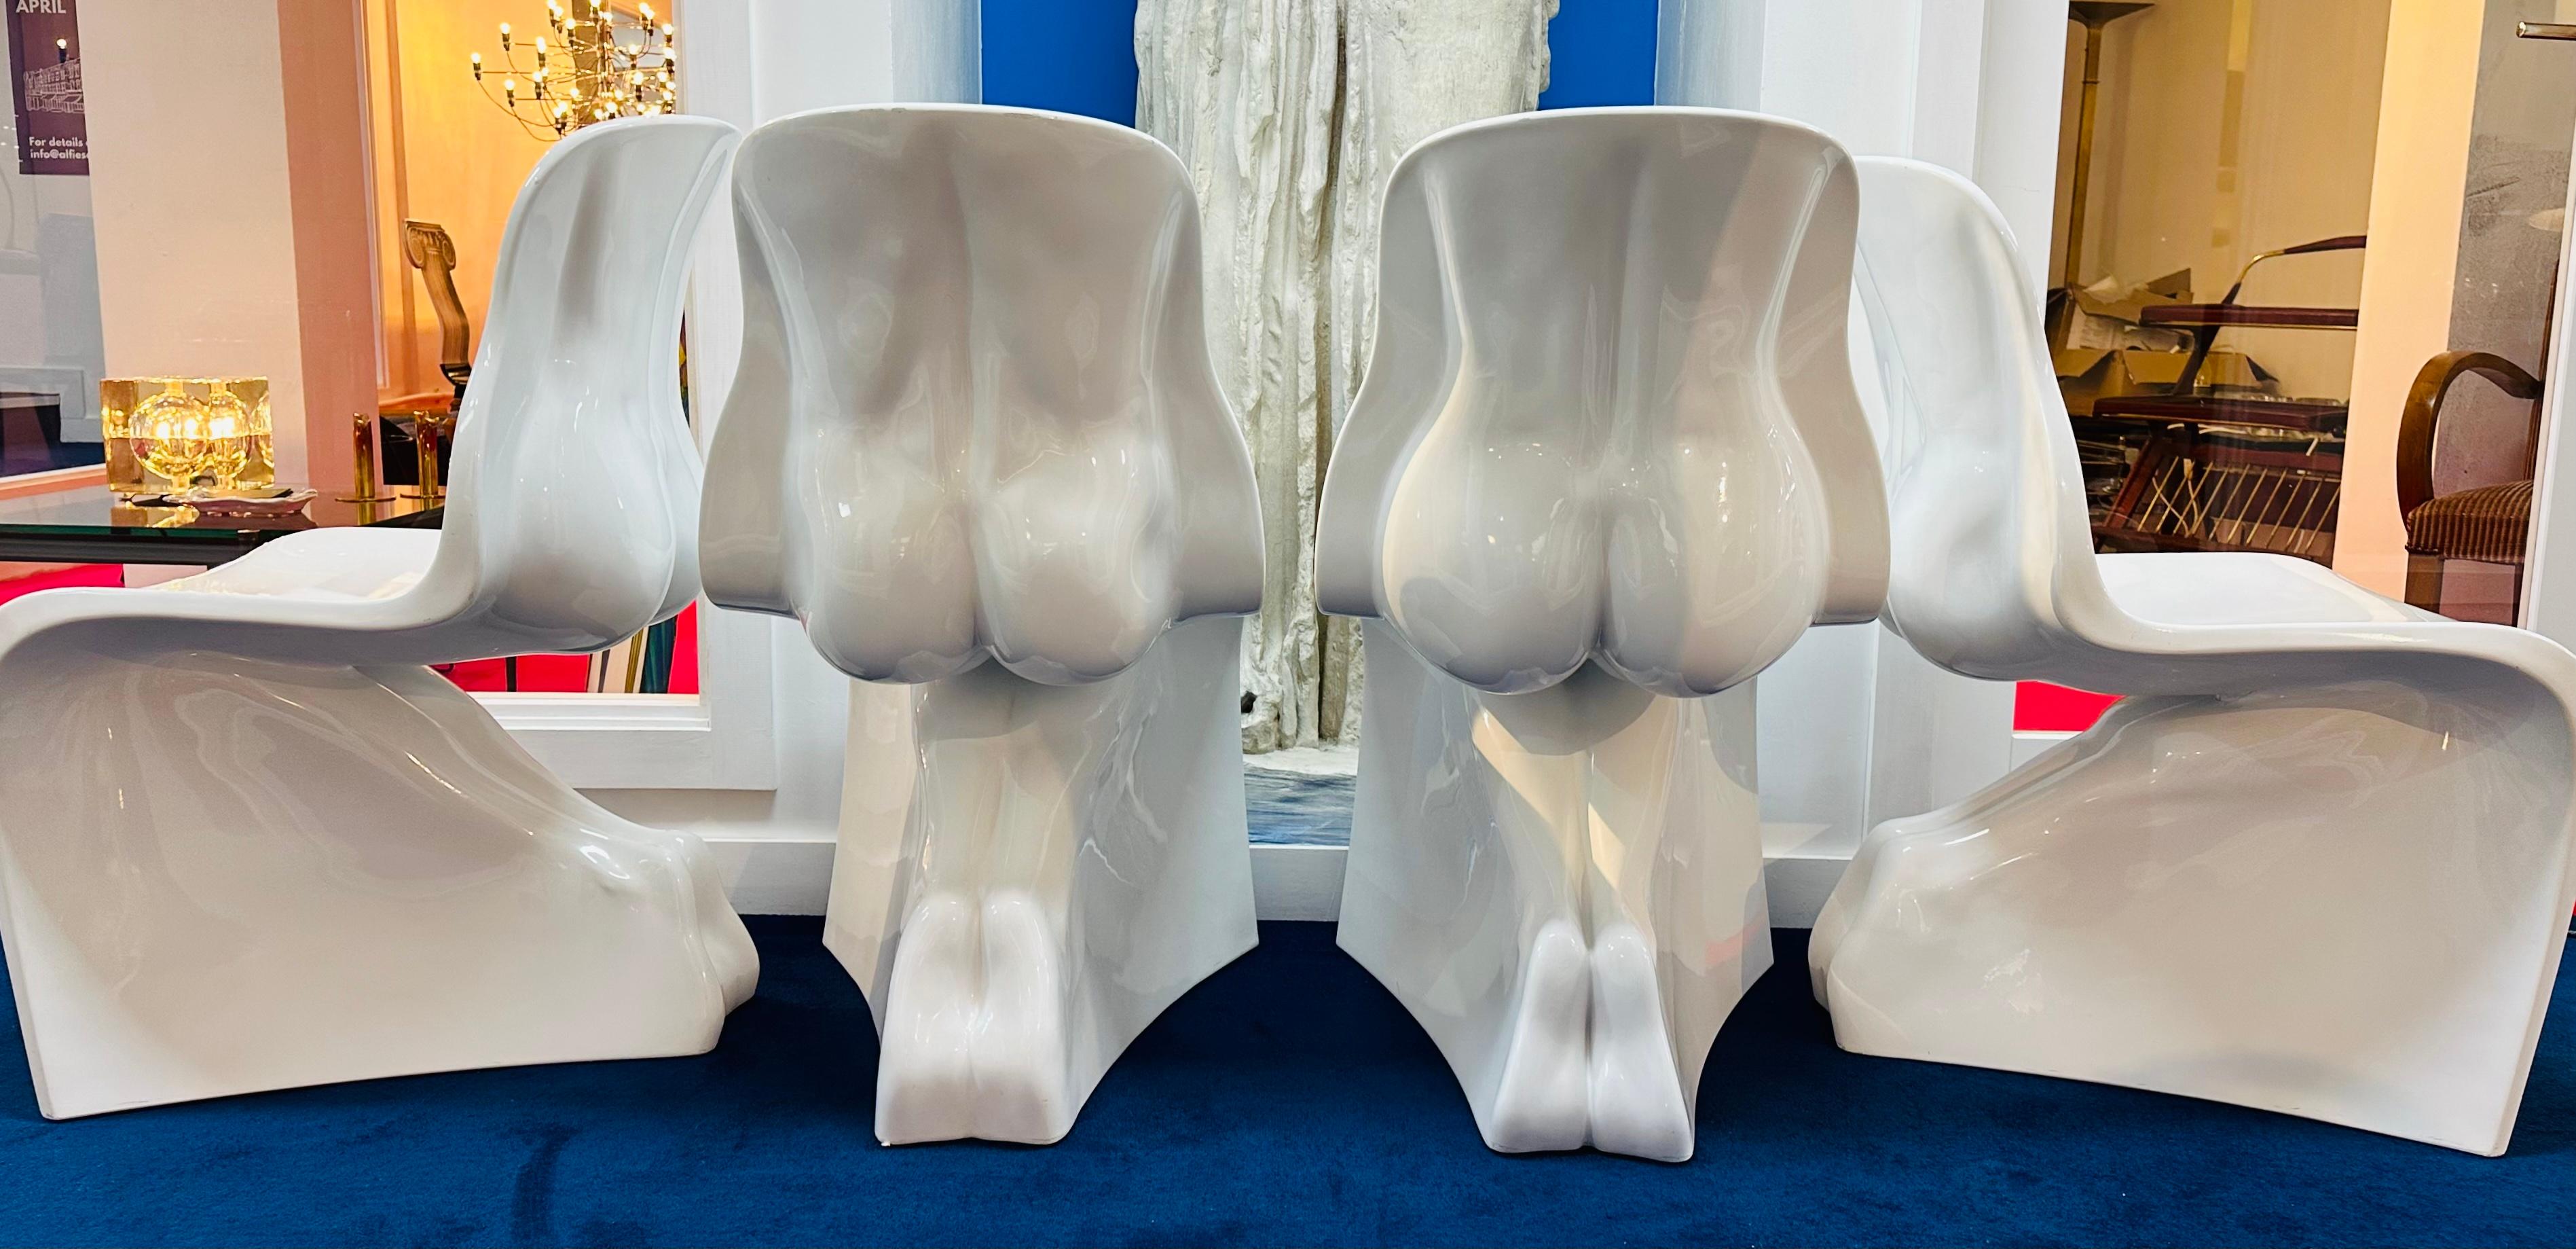 Polished Set of 4 2008 Him & Her Glossy White Glossy Chair - Fabio Novembre for Casamania